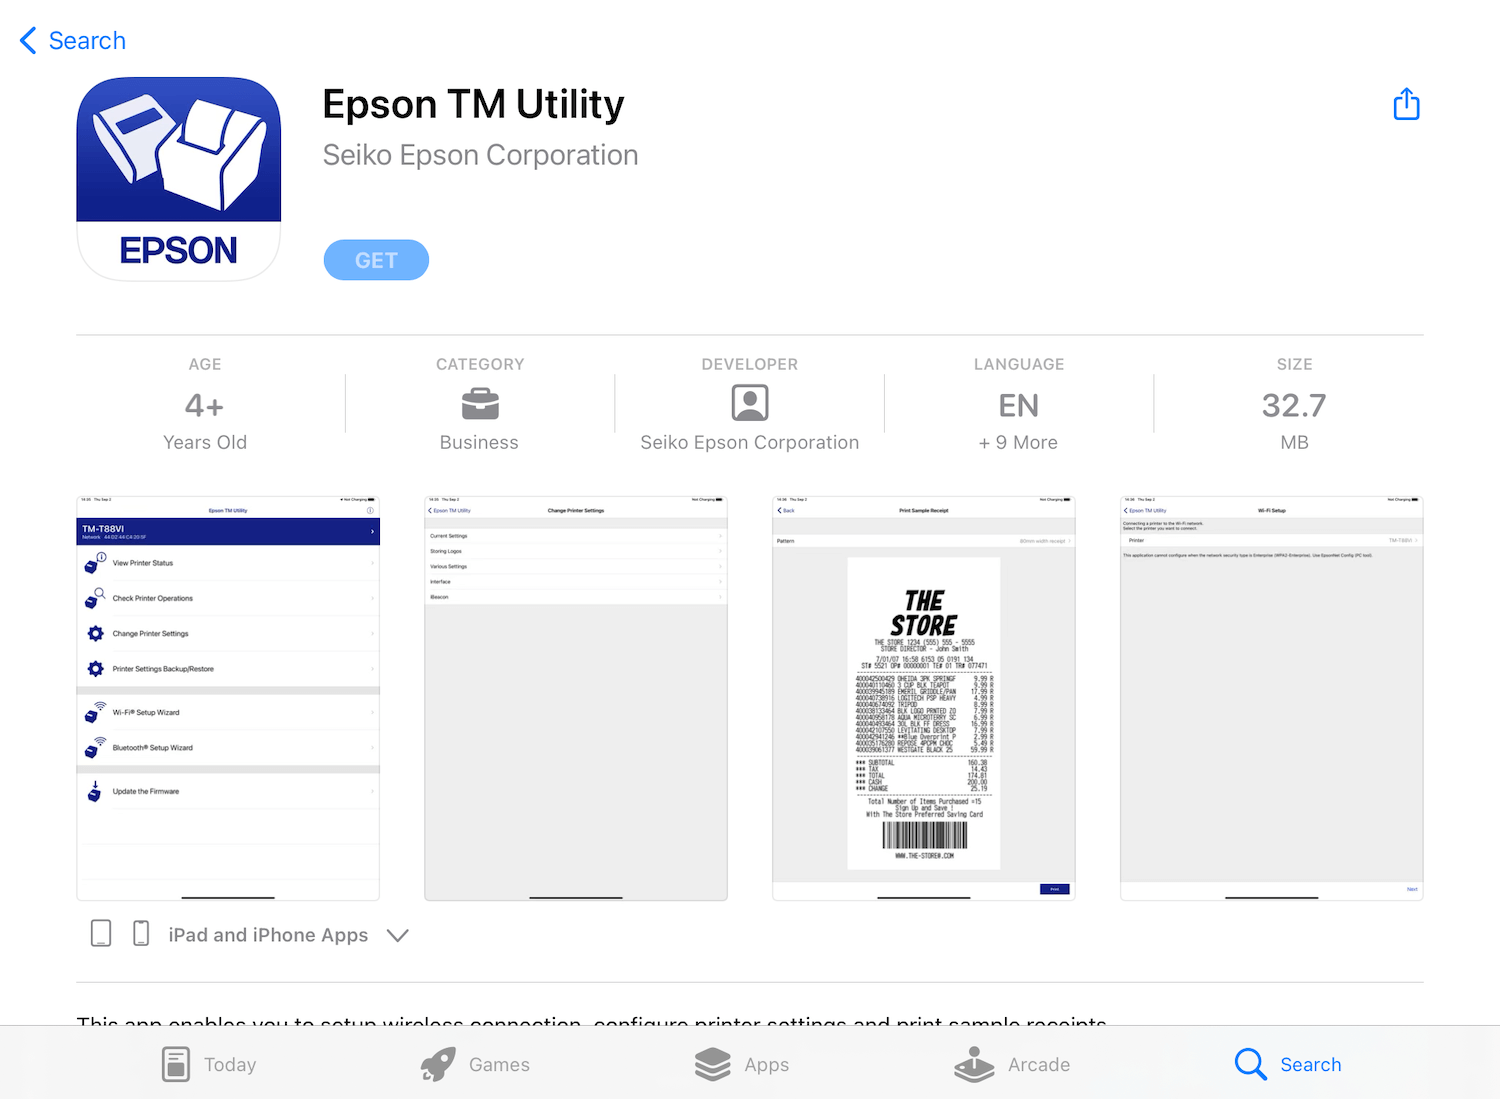 The listing for the Epson TM Utility app on the app store.